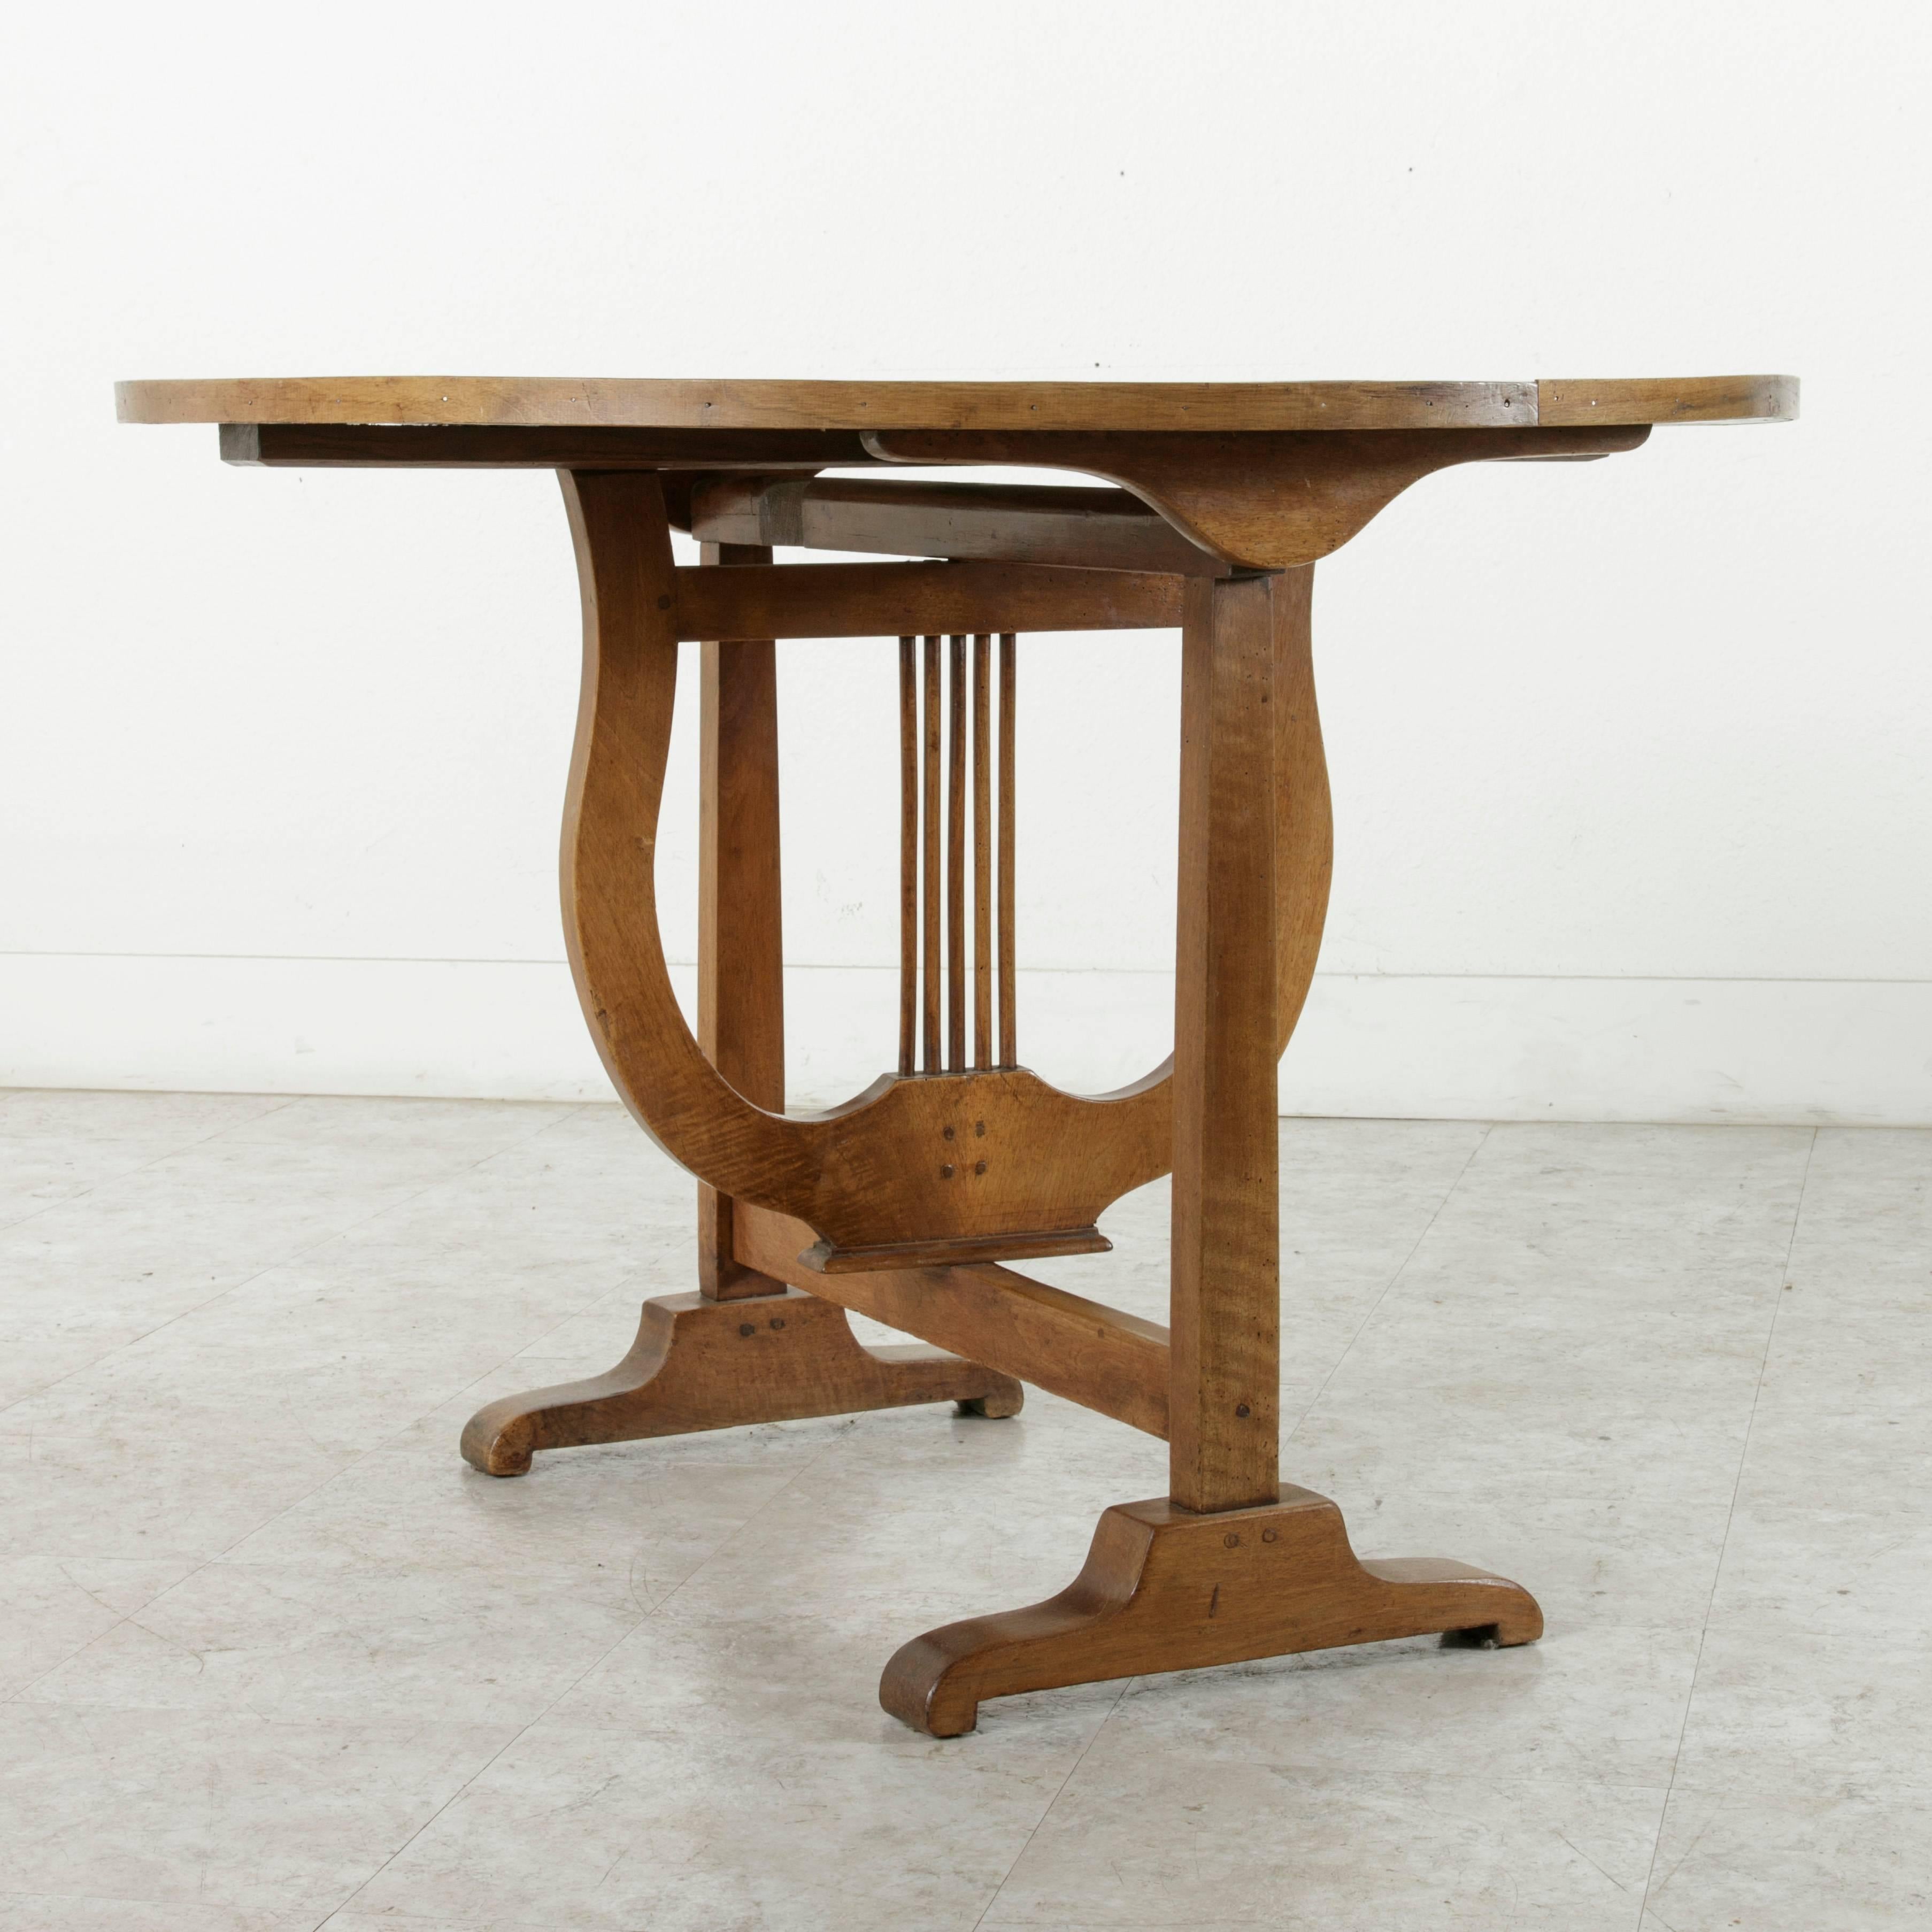 This antique vineyard table was found in Dijon, in the heart of the Burgundy region in France. Constructed of hand pegged walnut, this vineyard table features a swiveling lyre base and pine tilt-top. This piece was originally used for wine tasting